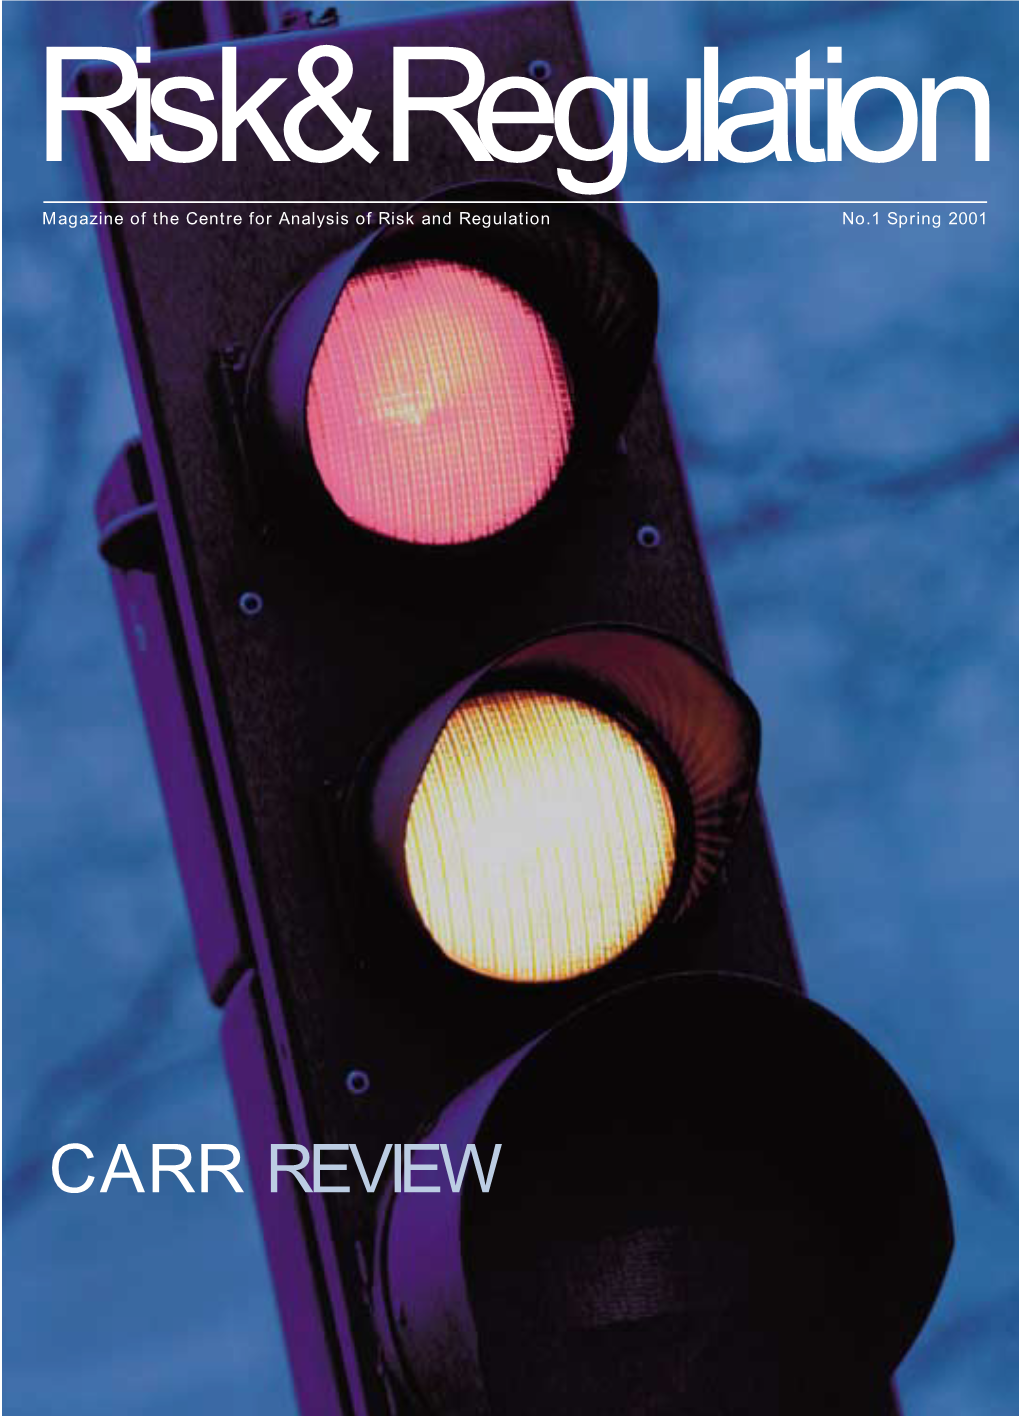 CARR REVIEW Contents